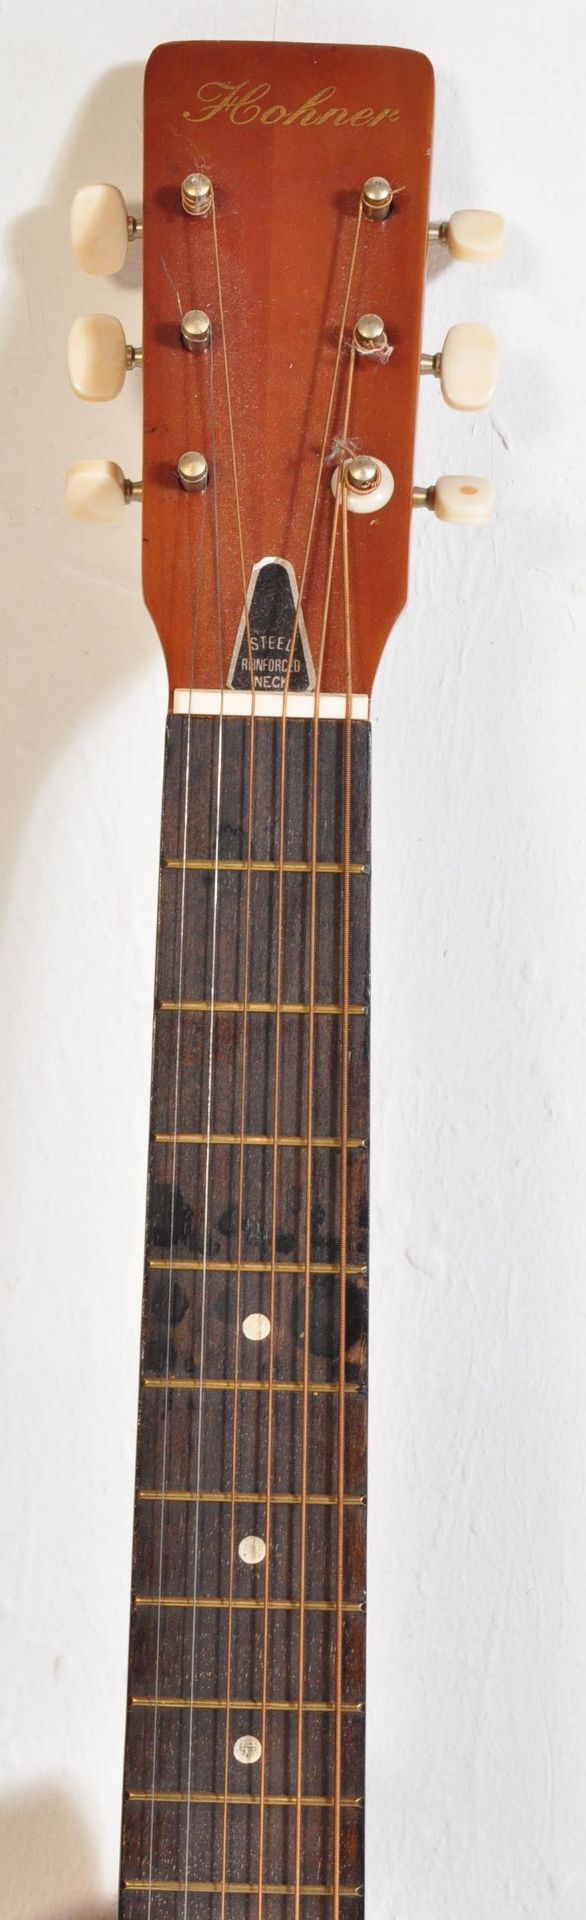 TWO RETRO VINTAGE ACOUSTIC GUITARS - Image 5 of 6